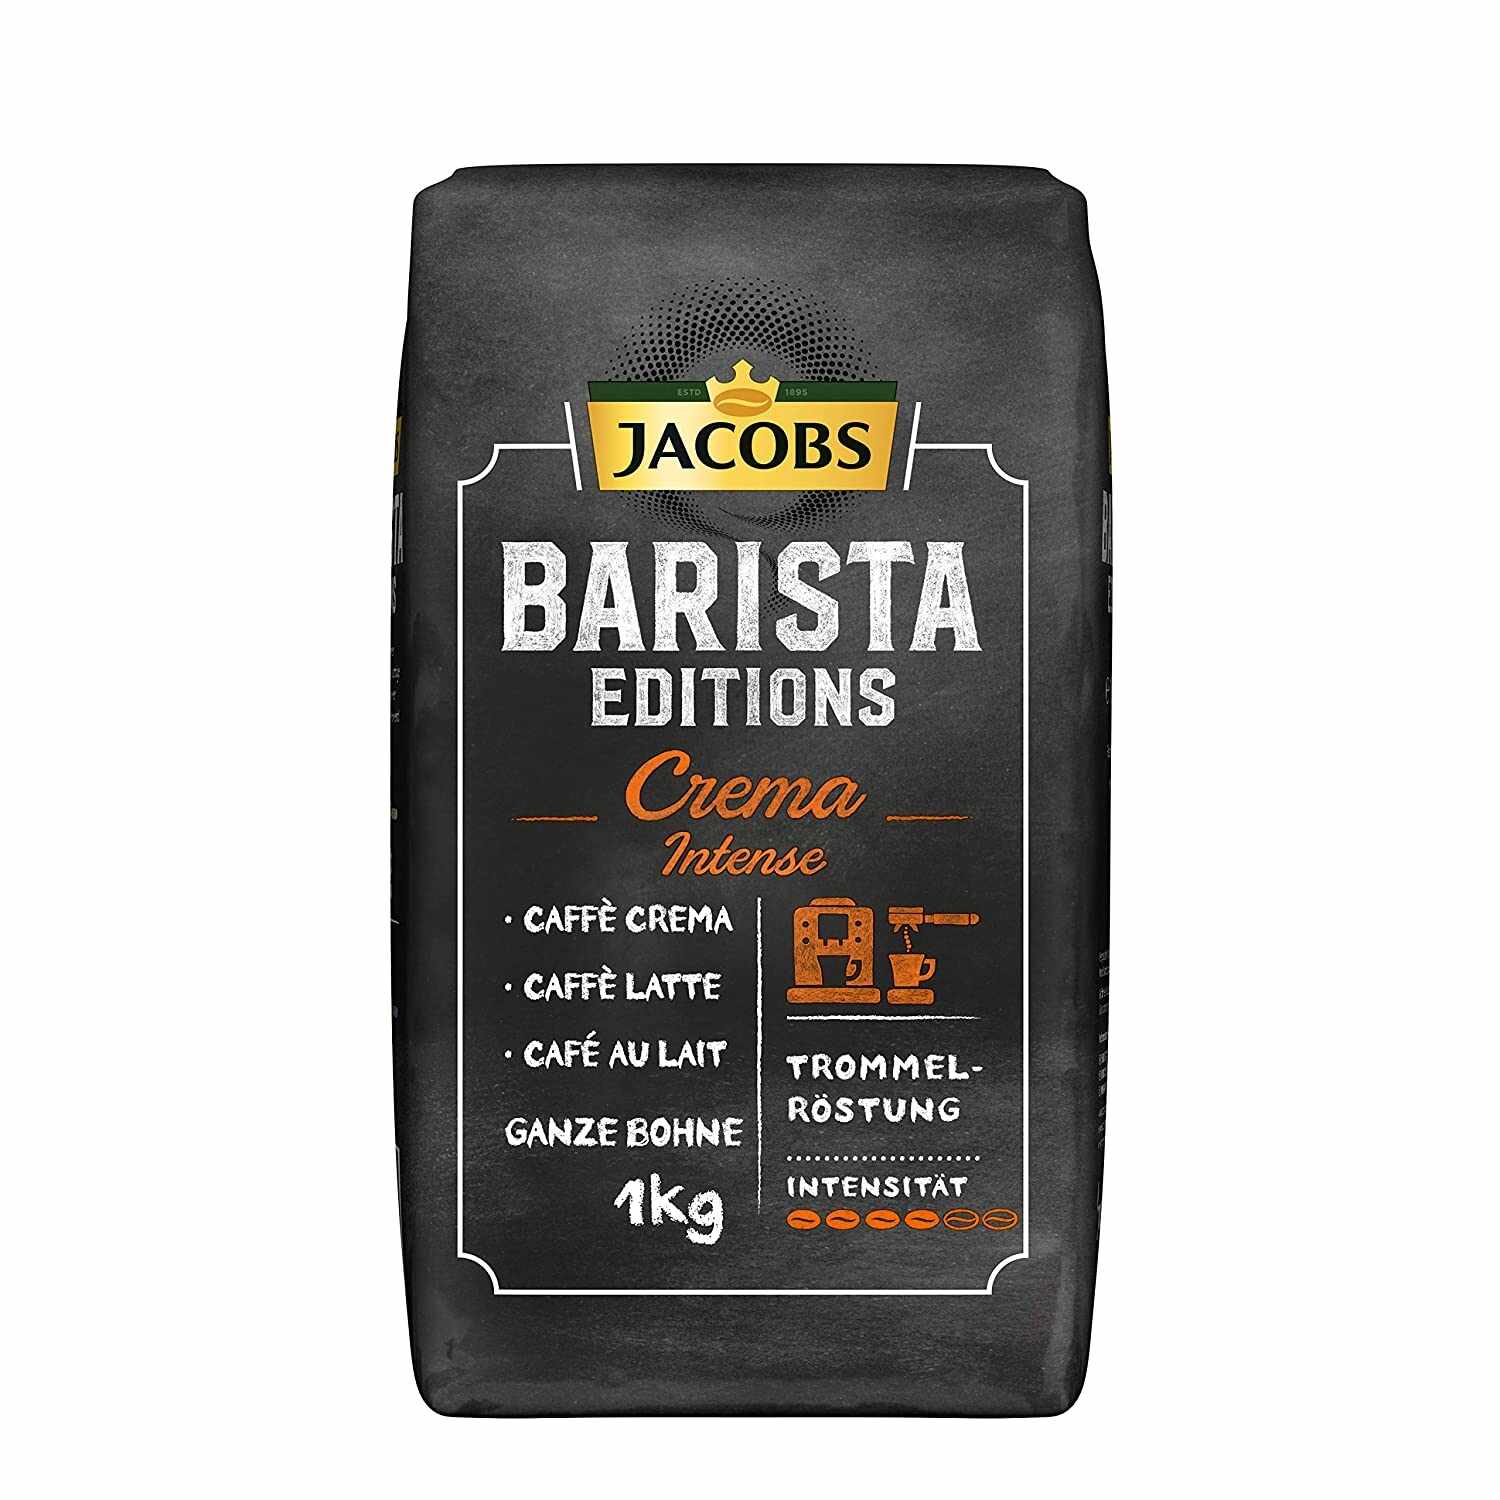 Jacobs Barista Editions Crema Intense 1kg boabe